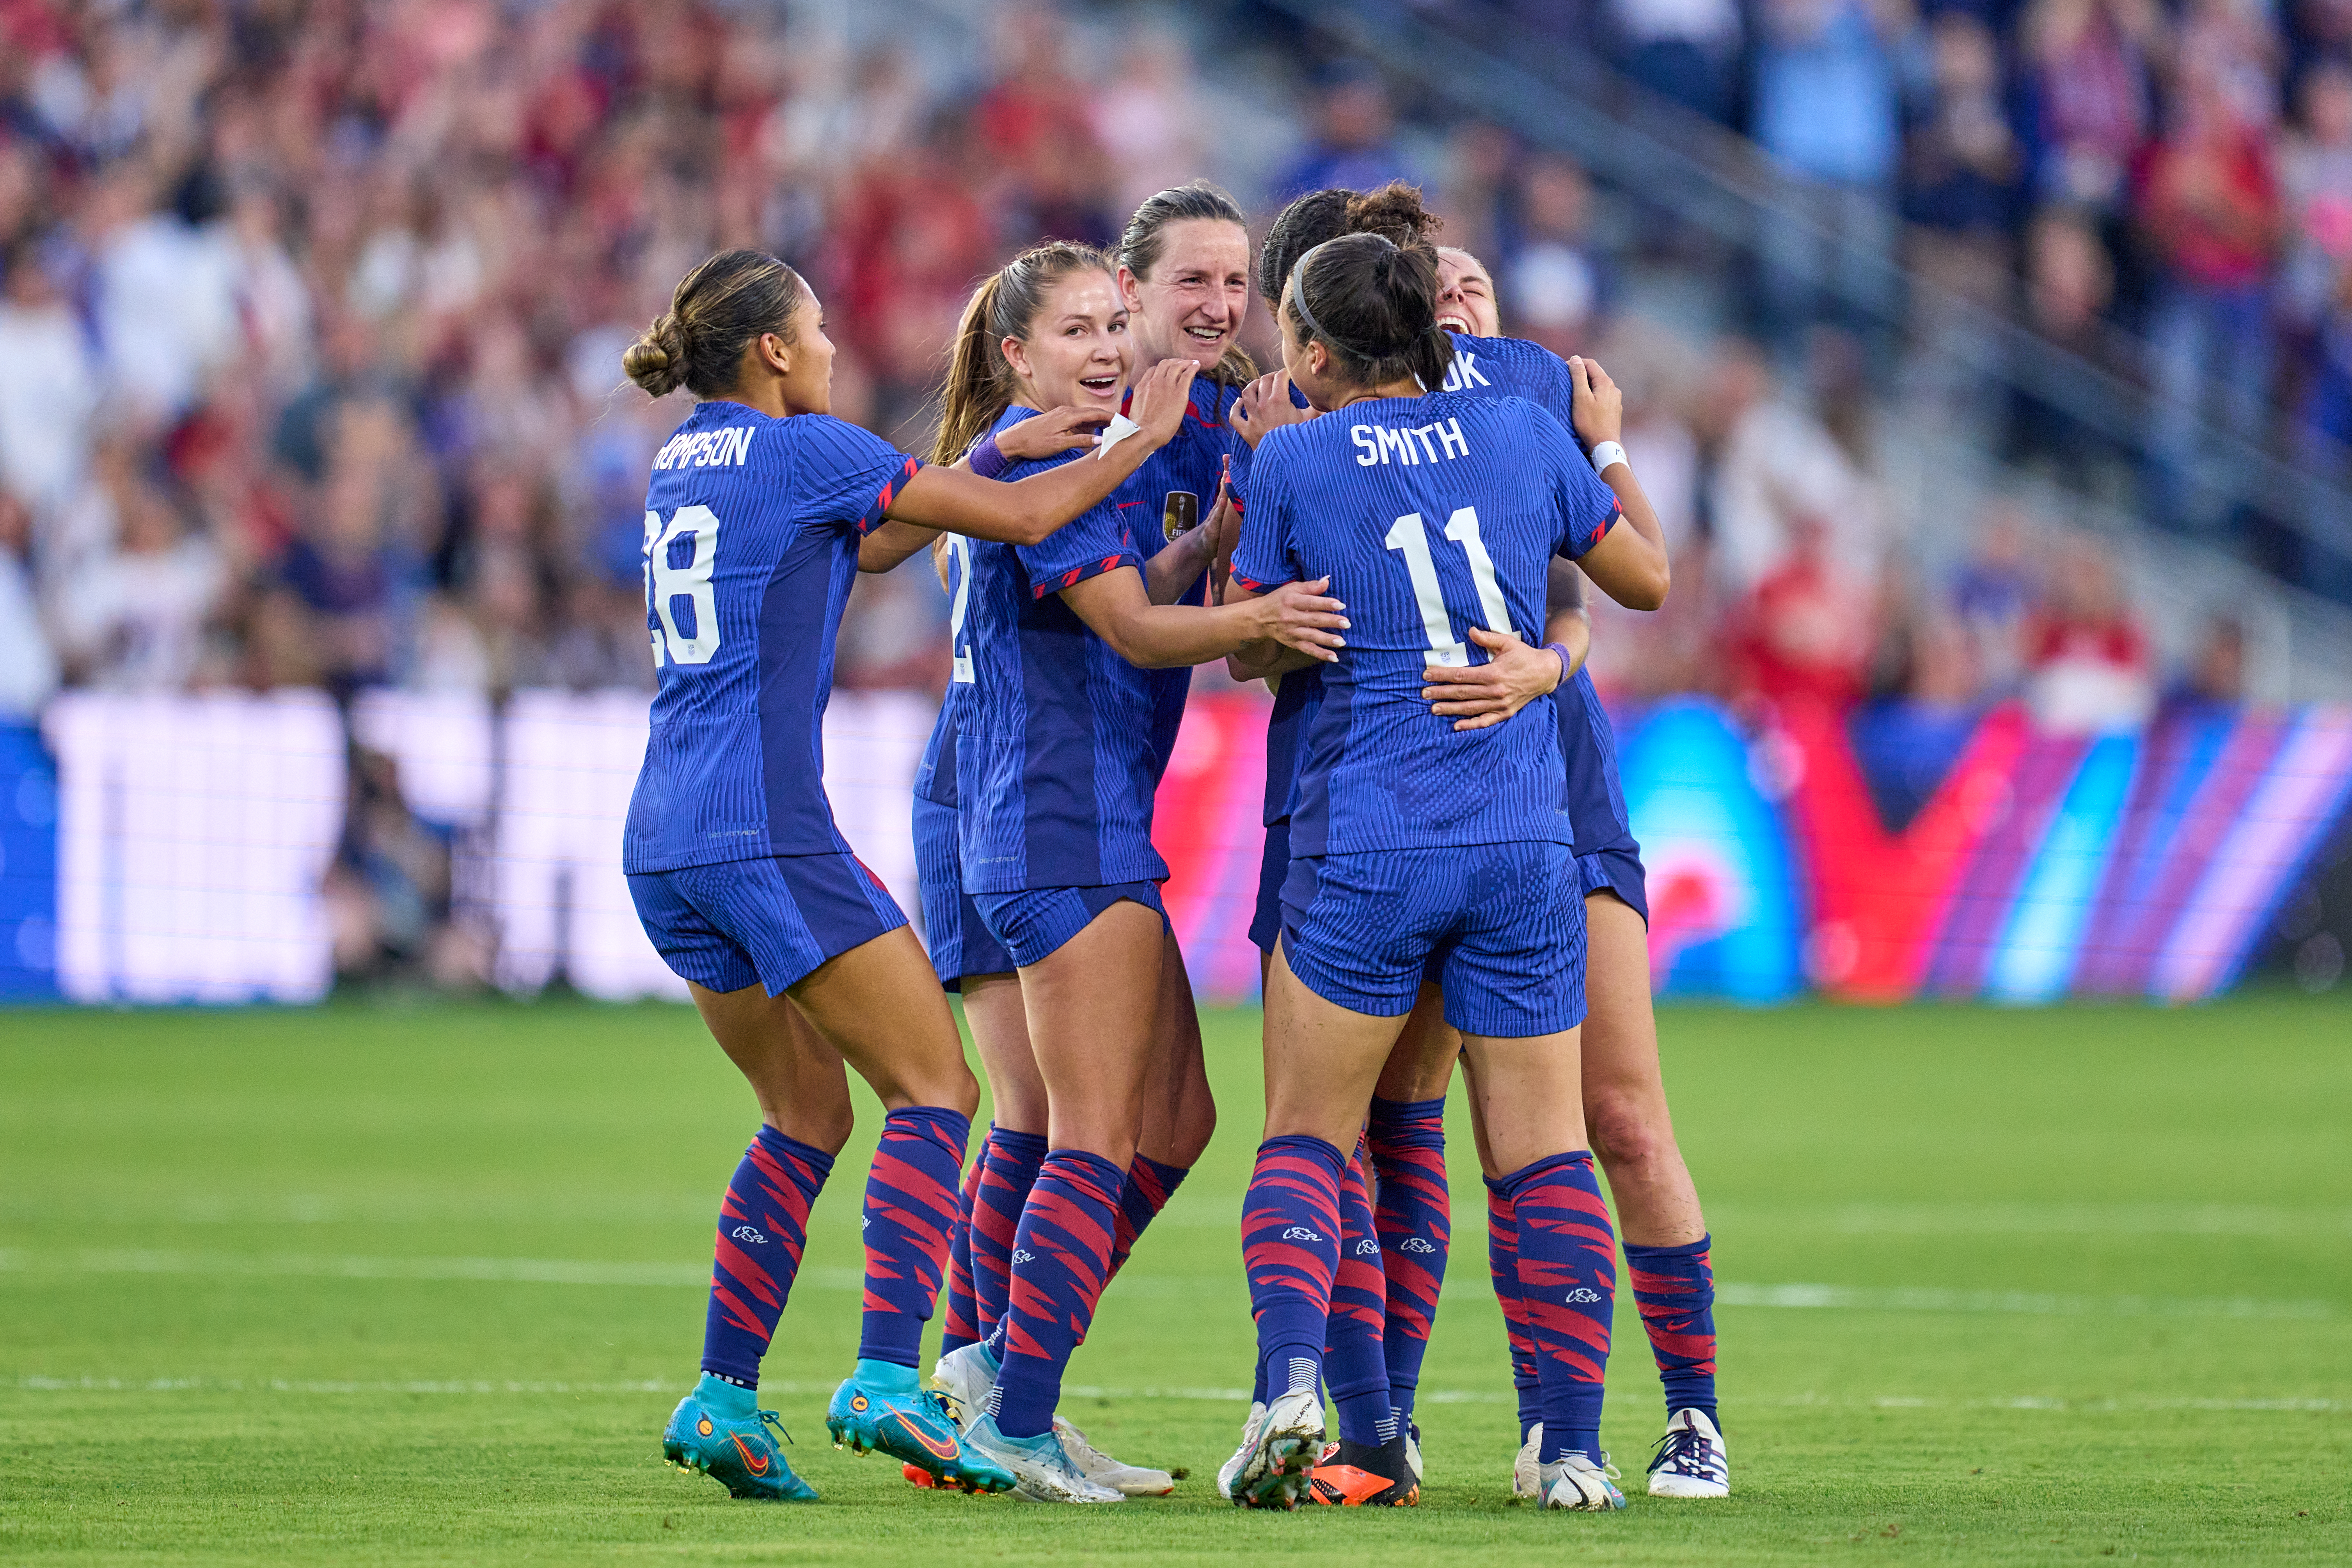 World Cup NOW: No three-peat for USA, but this team left an